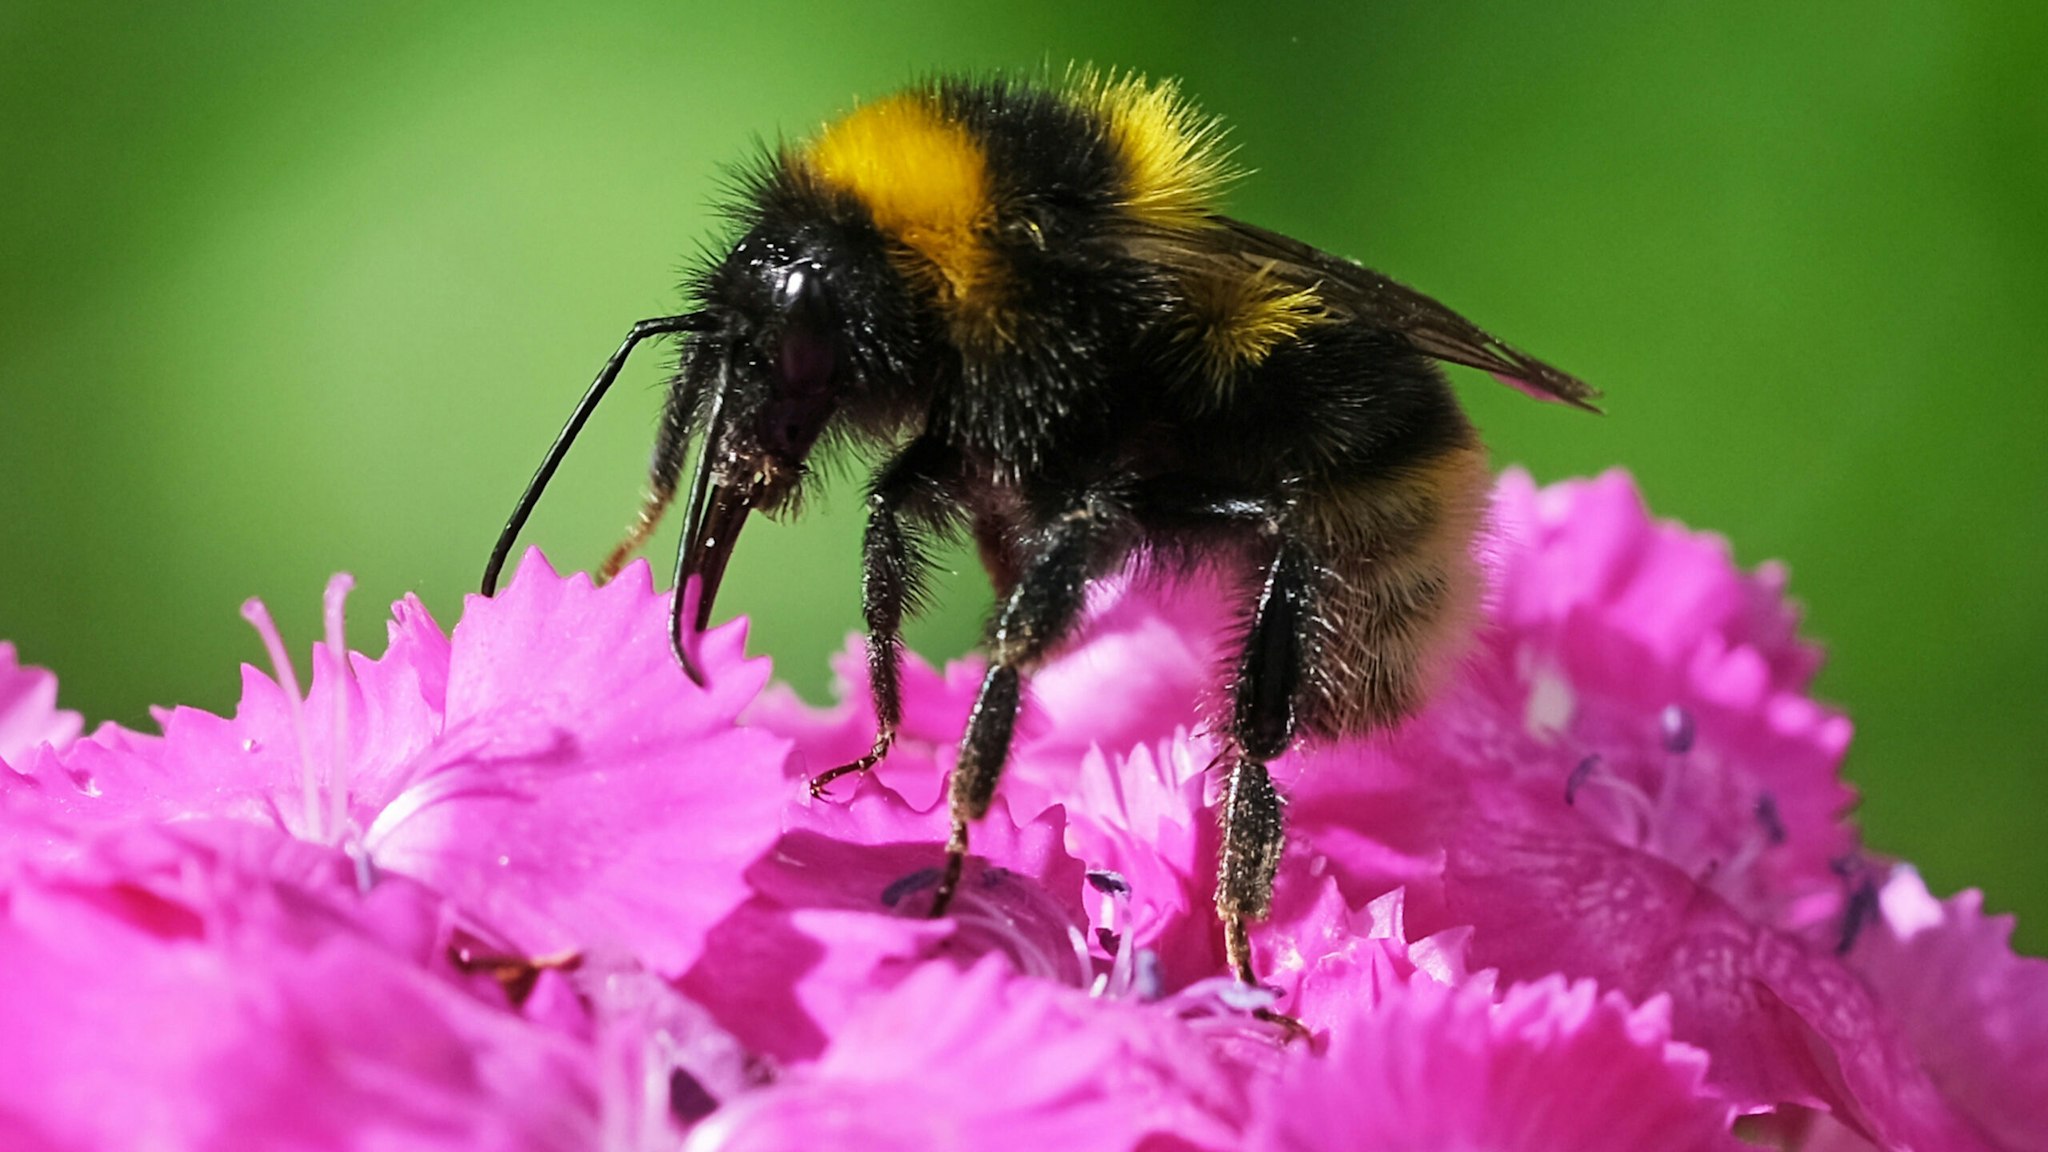 A bumblebee sits on a bearded carnation in a garden.